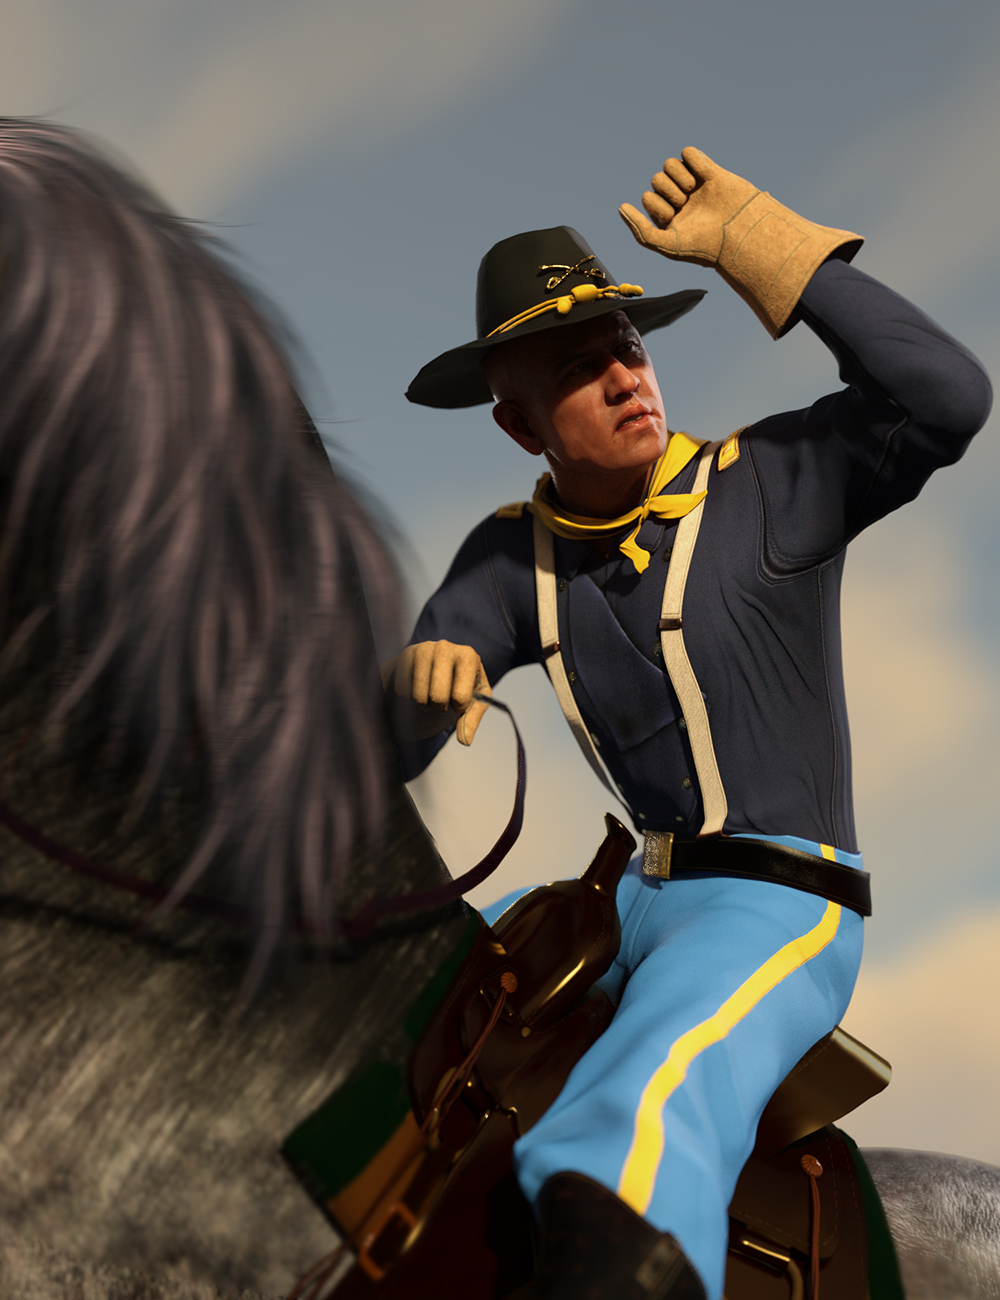 dForce US Cavalry Outfit for Genesis 8 and 8.1 Males